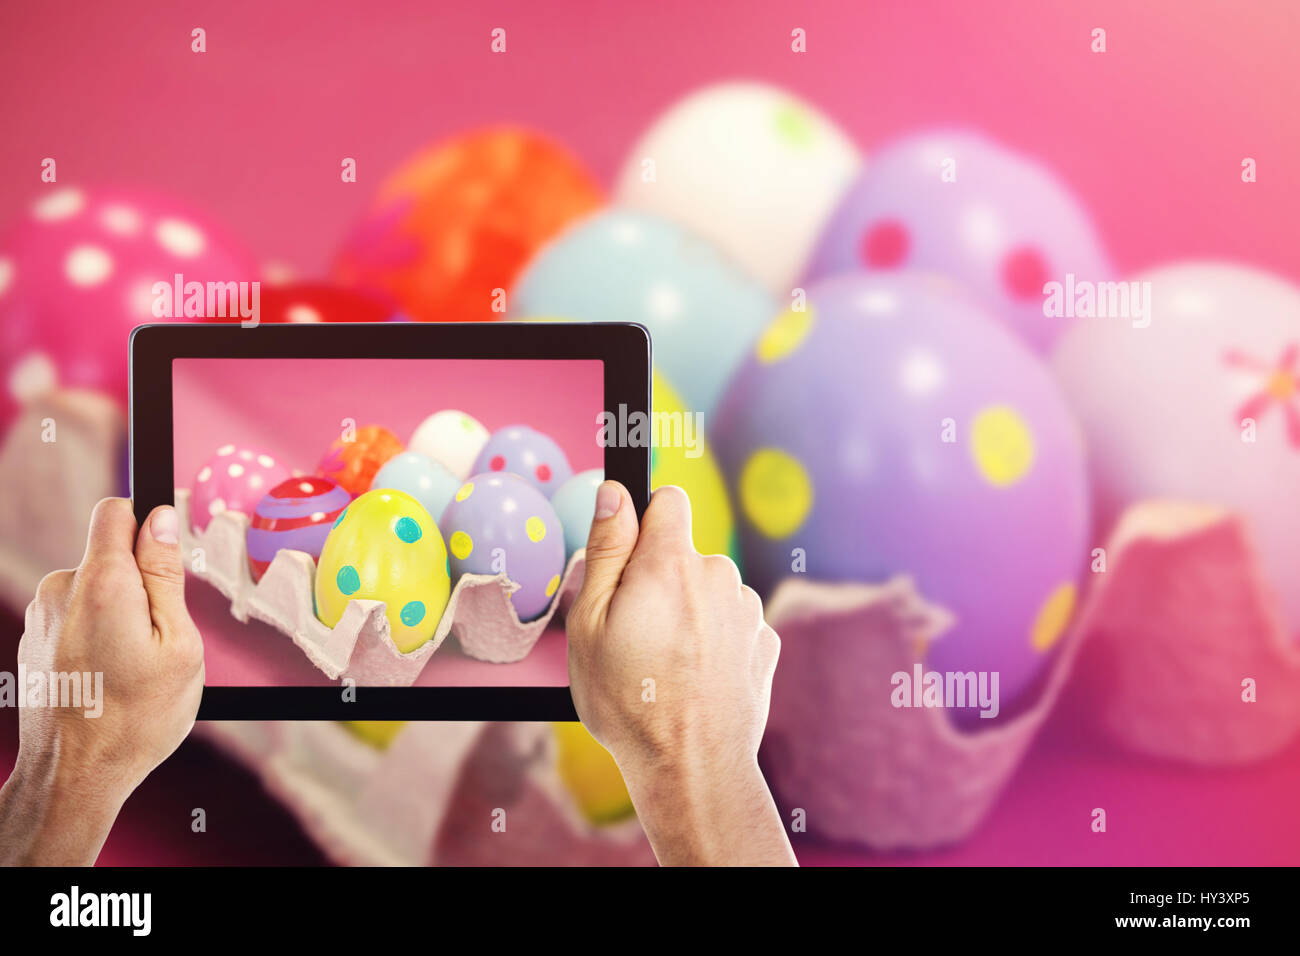 Cropped hand holding digital tablet against colorful easter eggs in egg carton Stock Photo